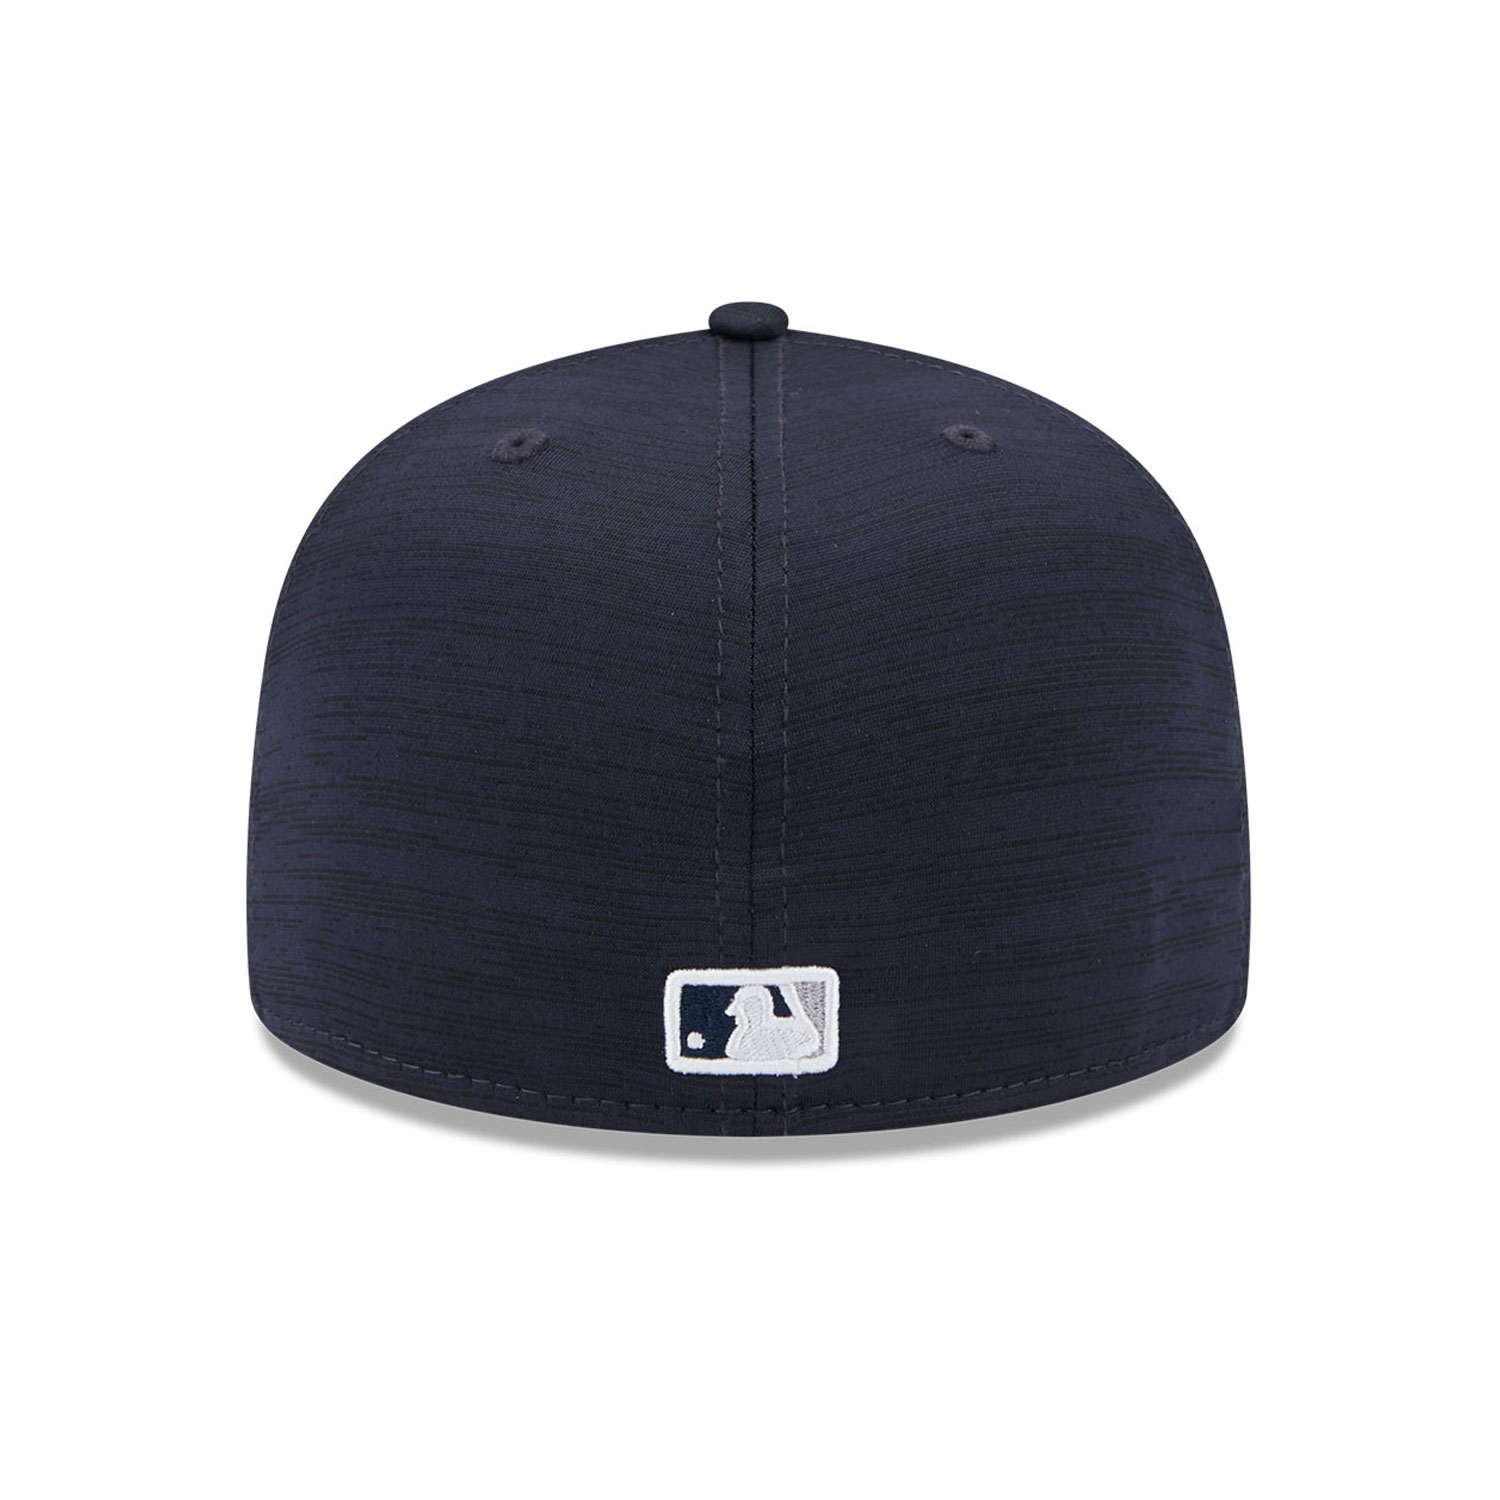 New York Yankees MLB Clubhouse Blue 59FIFTY Fitted Cap